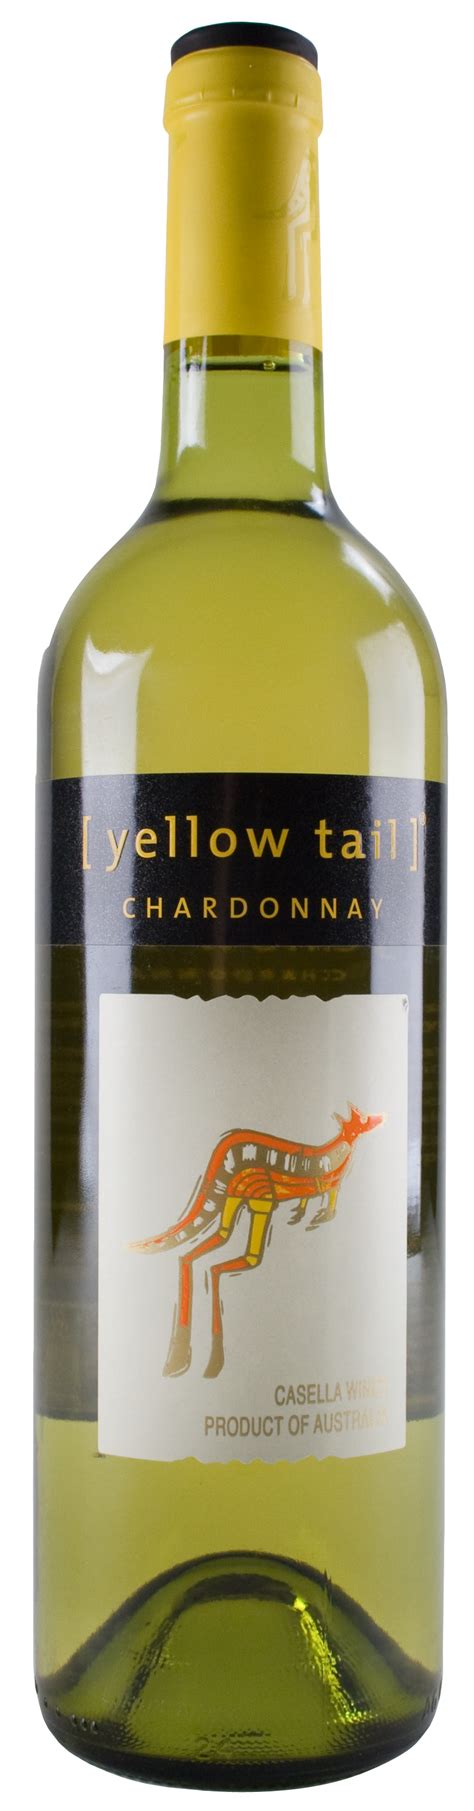 Download Yellow Tail Wine Bottle Png Image For Free